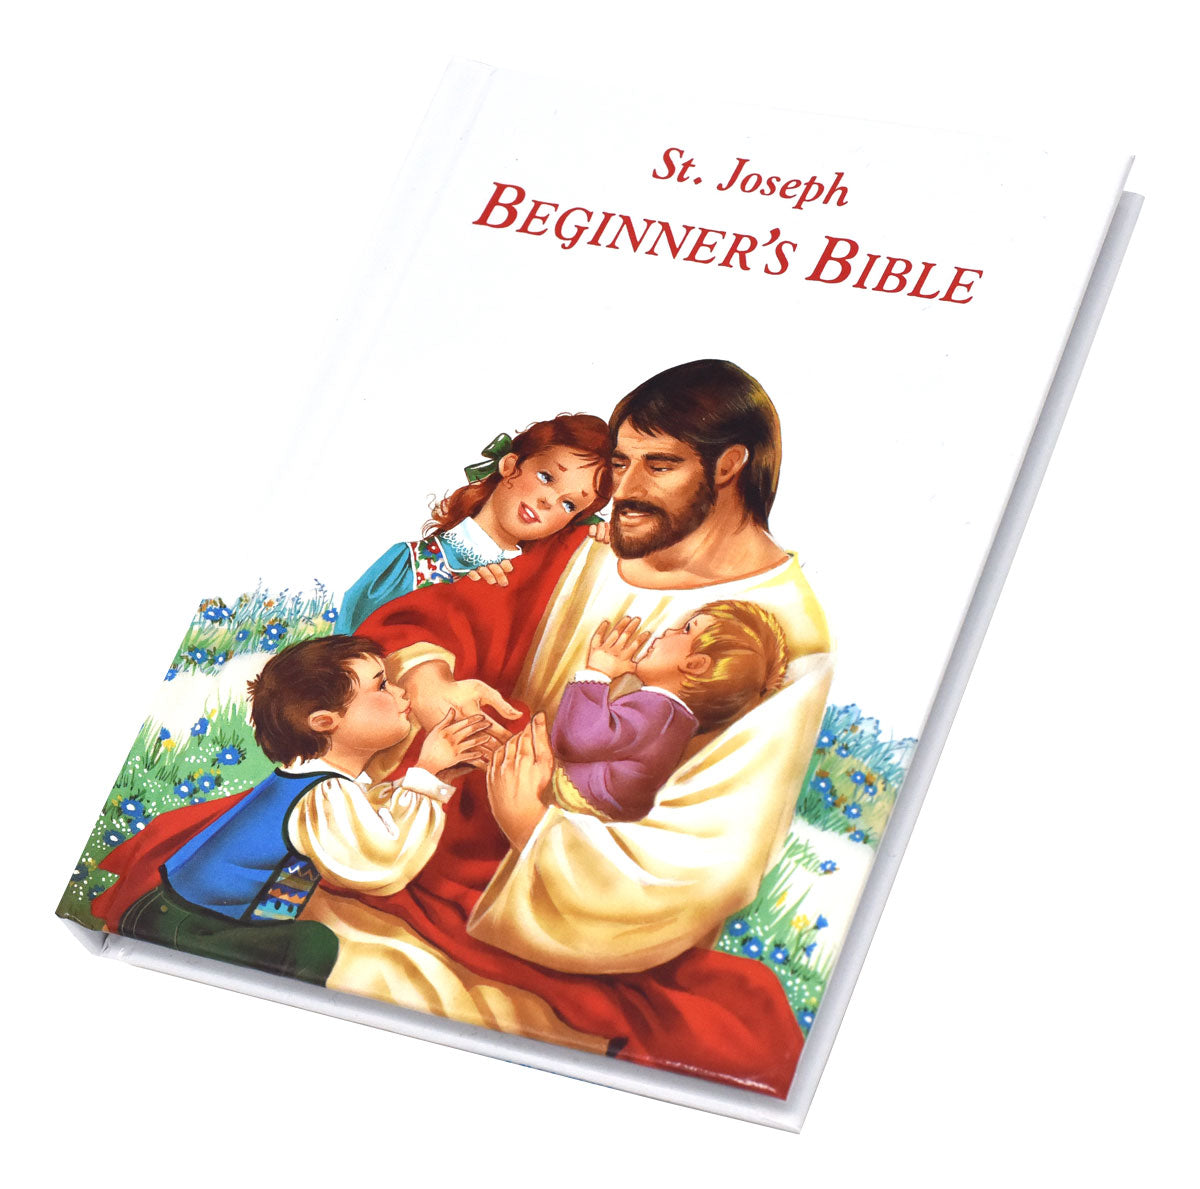 ﻿In Santa María del Monte, catholic bookstore,our goal is to evangelize and our products help us to do so, this is why we present you this hand book:"Beginners Bible" over forty of the best-loved stories of the Bible, vividly retold for children. Each story is in simple language and captured in a full-color, superbly inspiring illustration. A perfect book for introducing very young children to the Bible..Find it in our books section and help us carry the message of Christ.Be part of Our Mission!